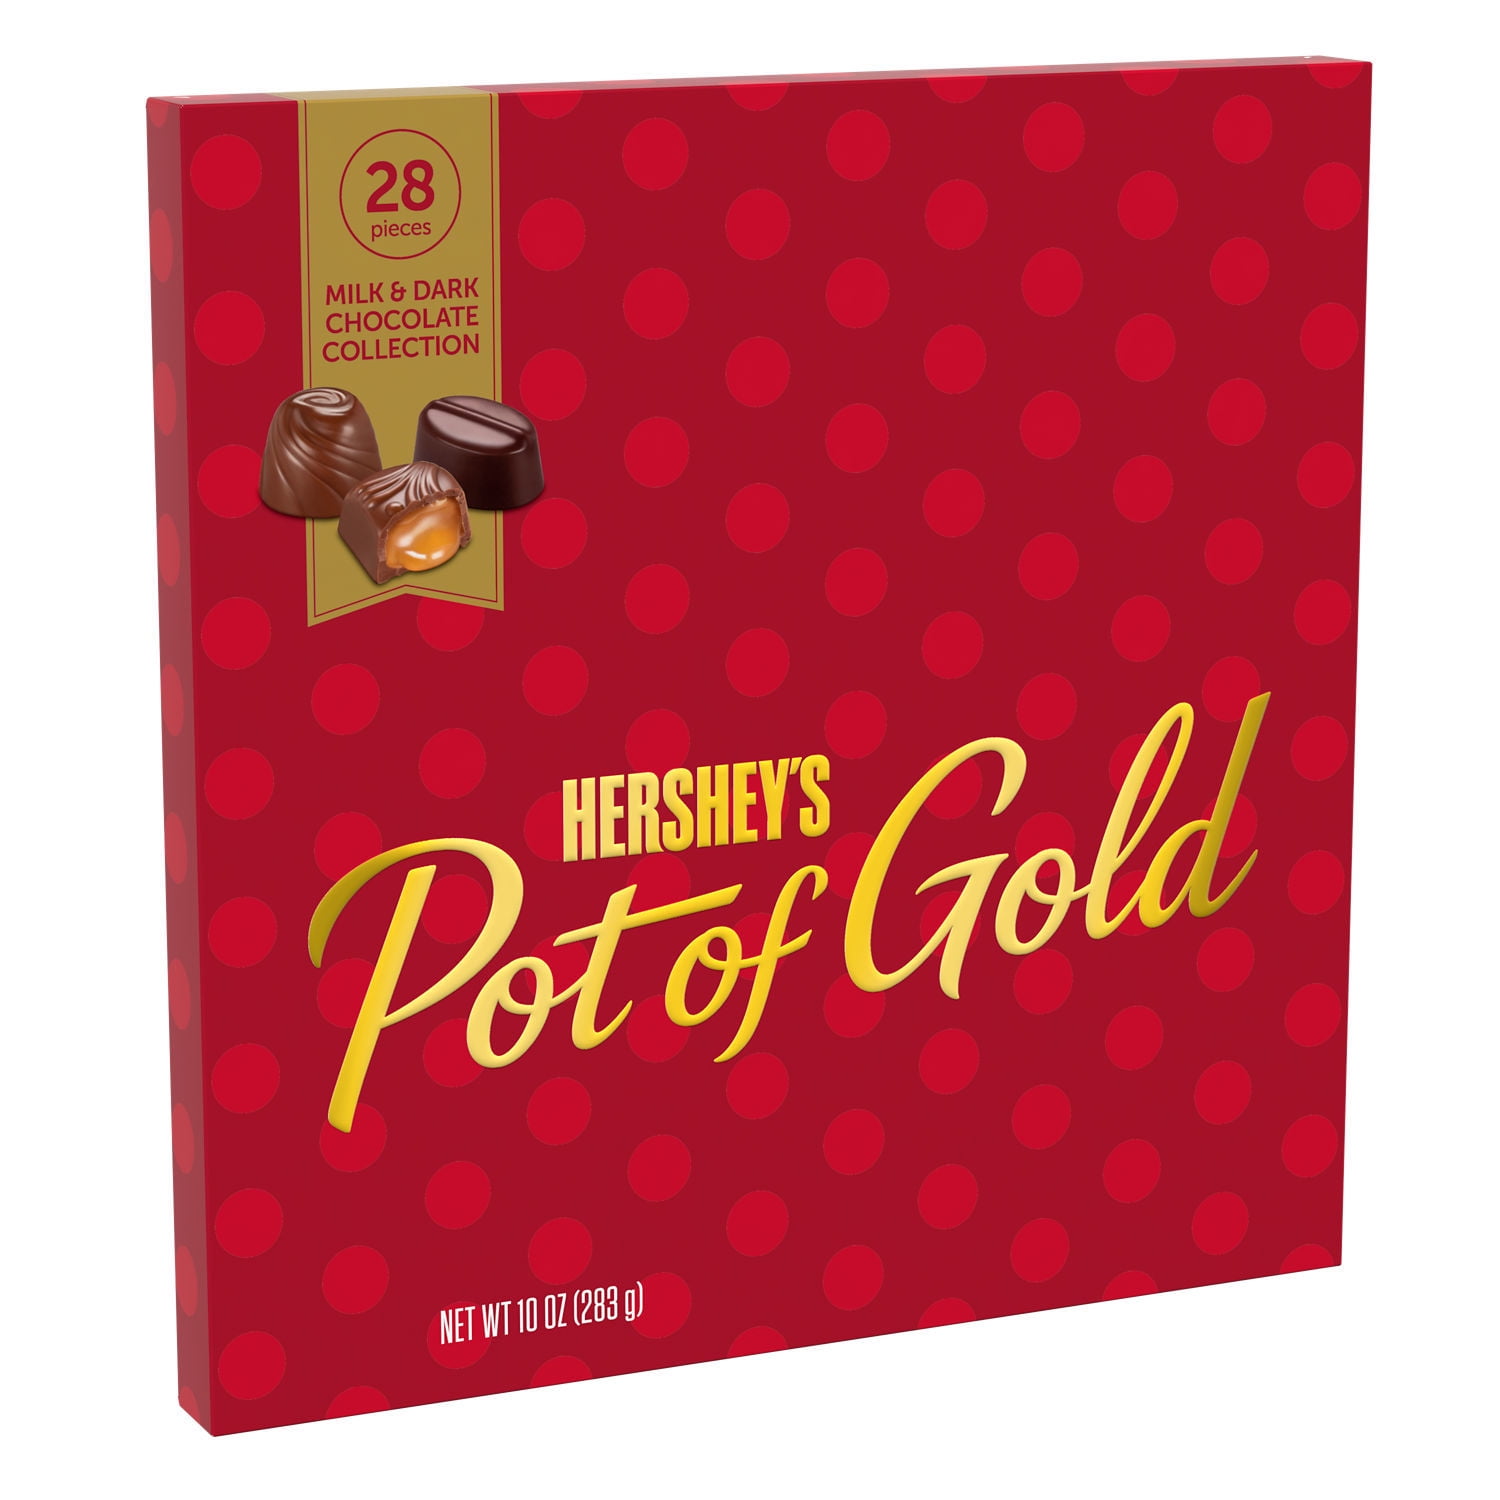 Gold Box - Save 30% or more off your holiday household essentials